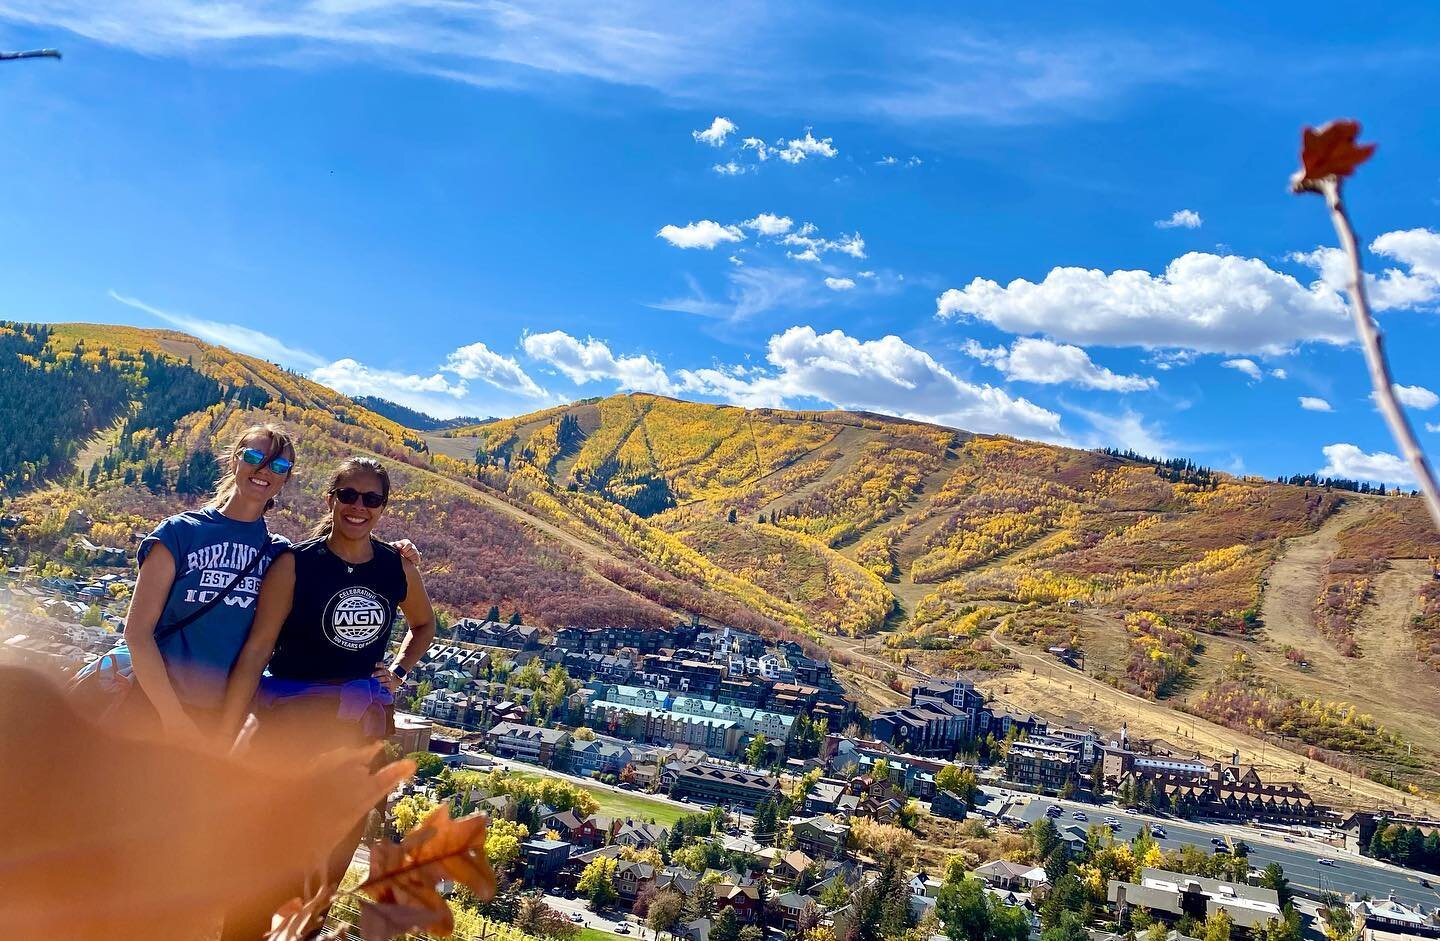 Sometimes shoving your phone in a tree takes a decent pic! Park City didn&rsquo;t disappoint. 🍁 🥾